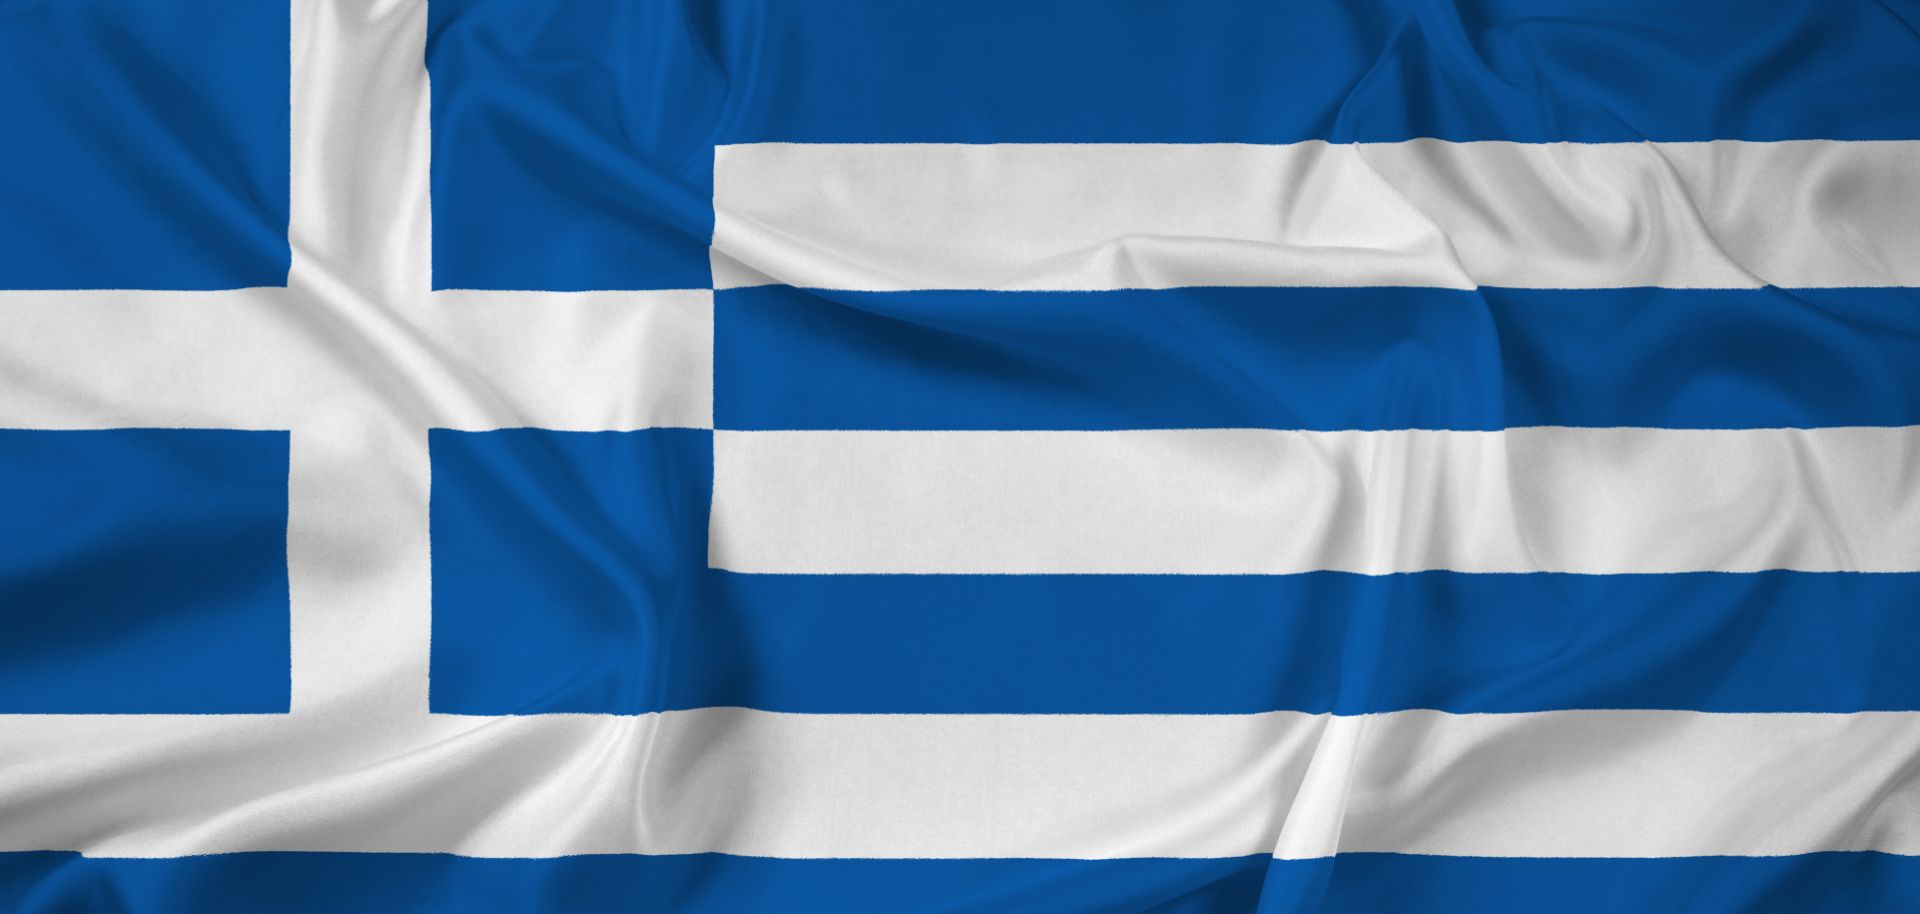 The national flag of Greece.